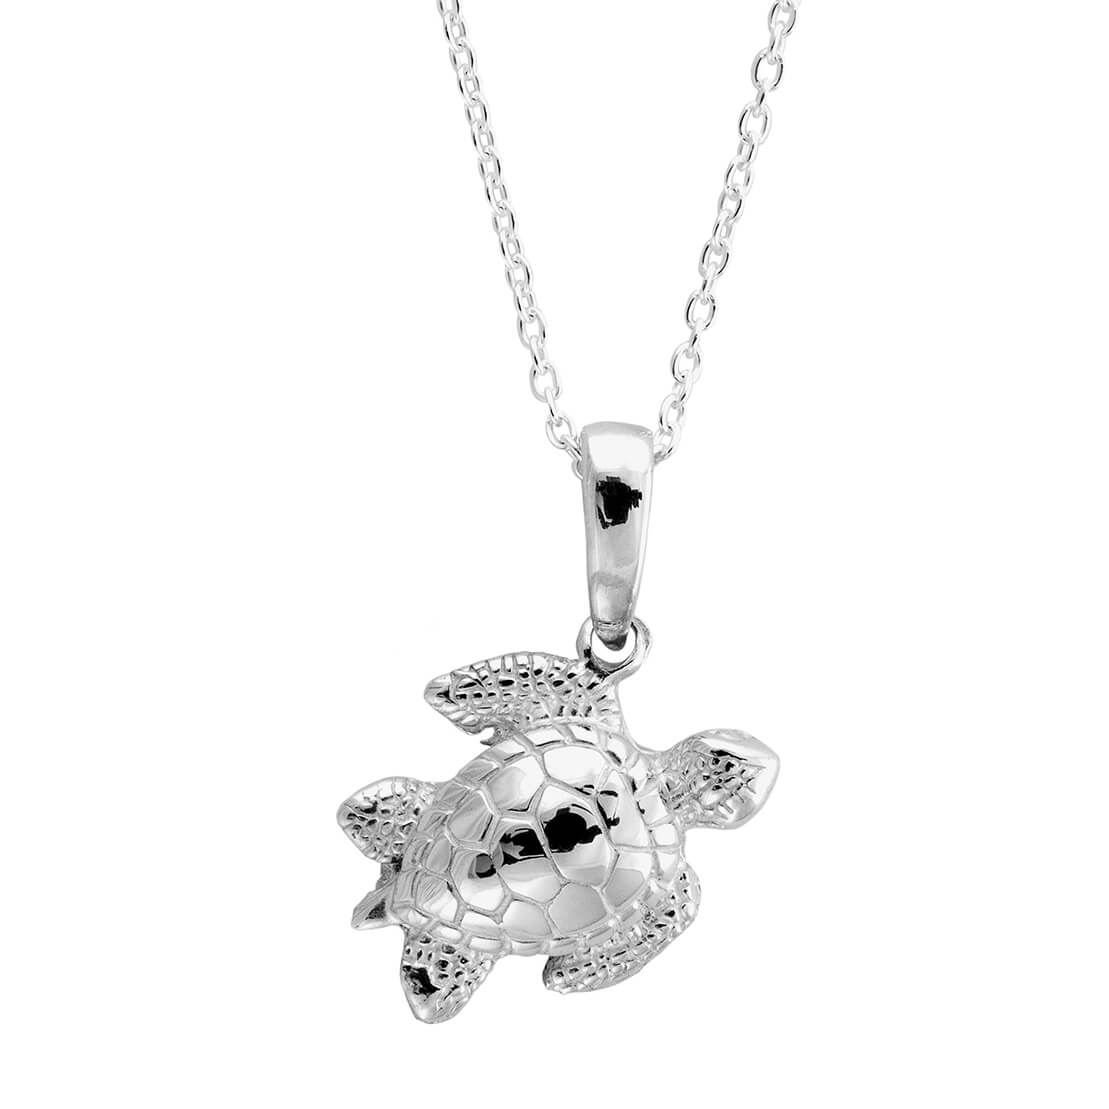 Sterling Silver Small Sea Turtle Charm Necklace - Wyland Foundation